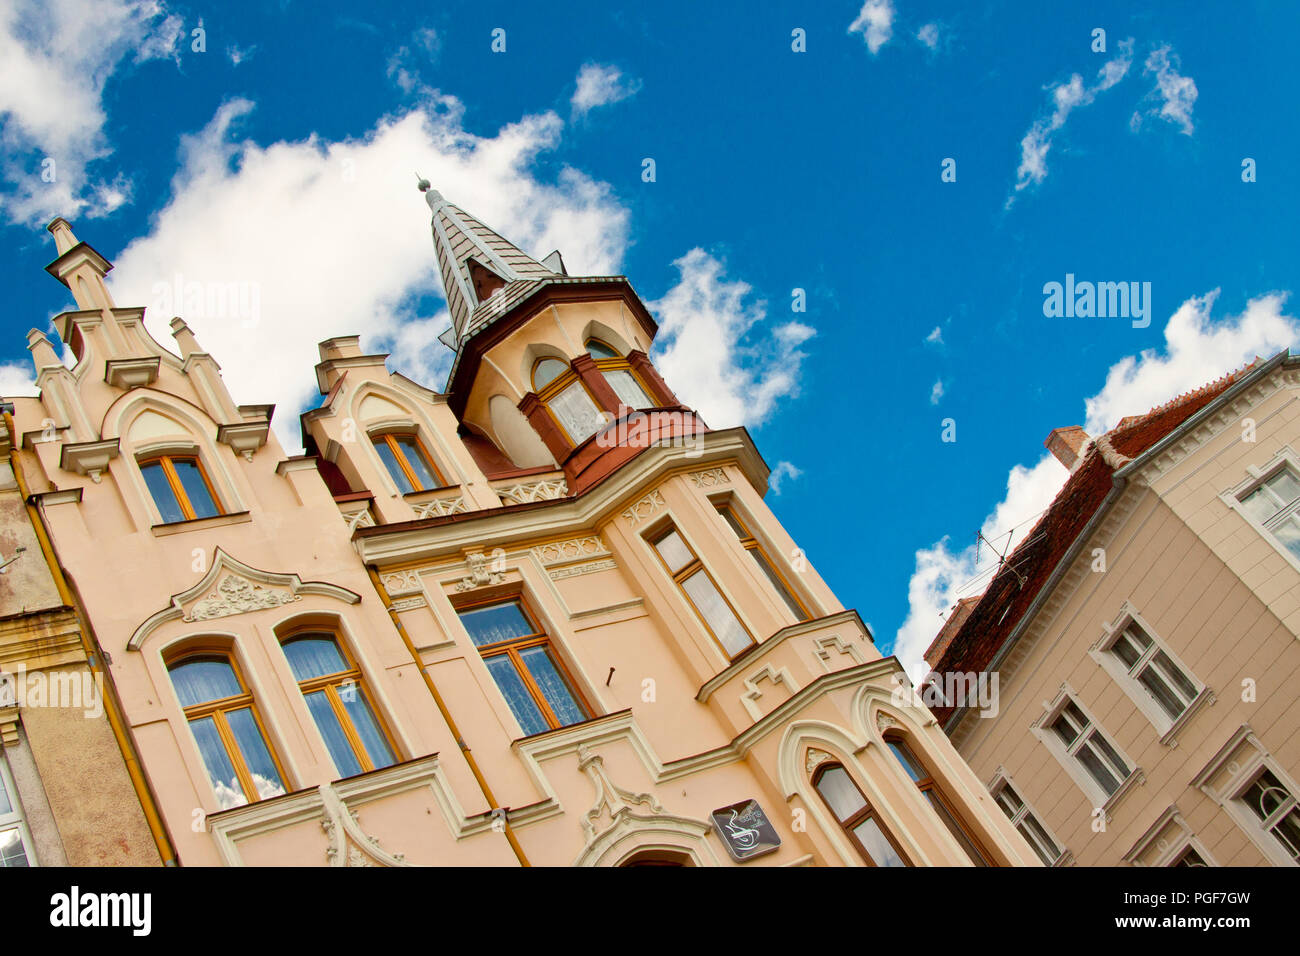 View on old colorful tenement house in Chelmno - Poland. Stock Photo